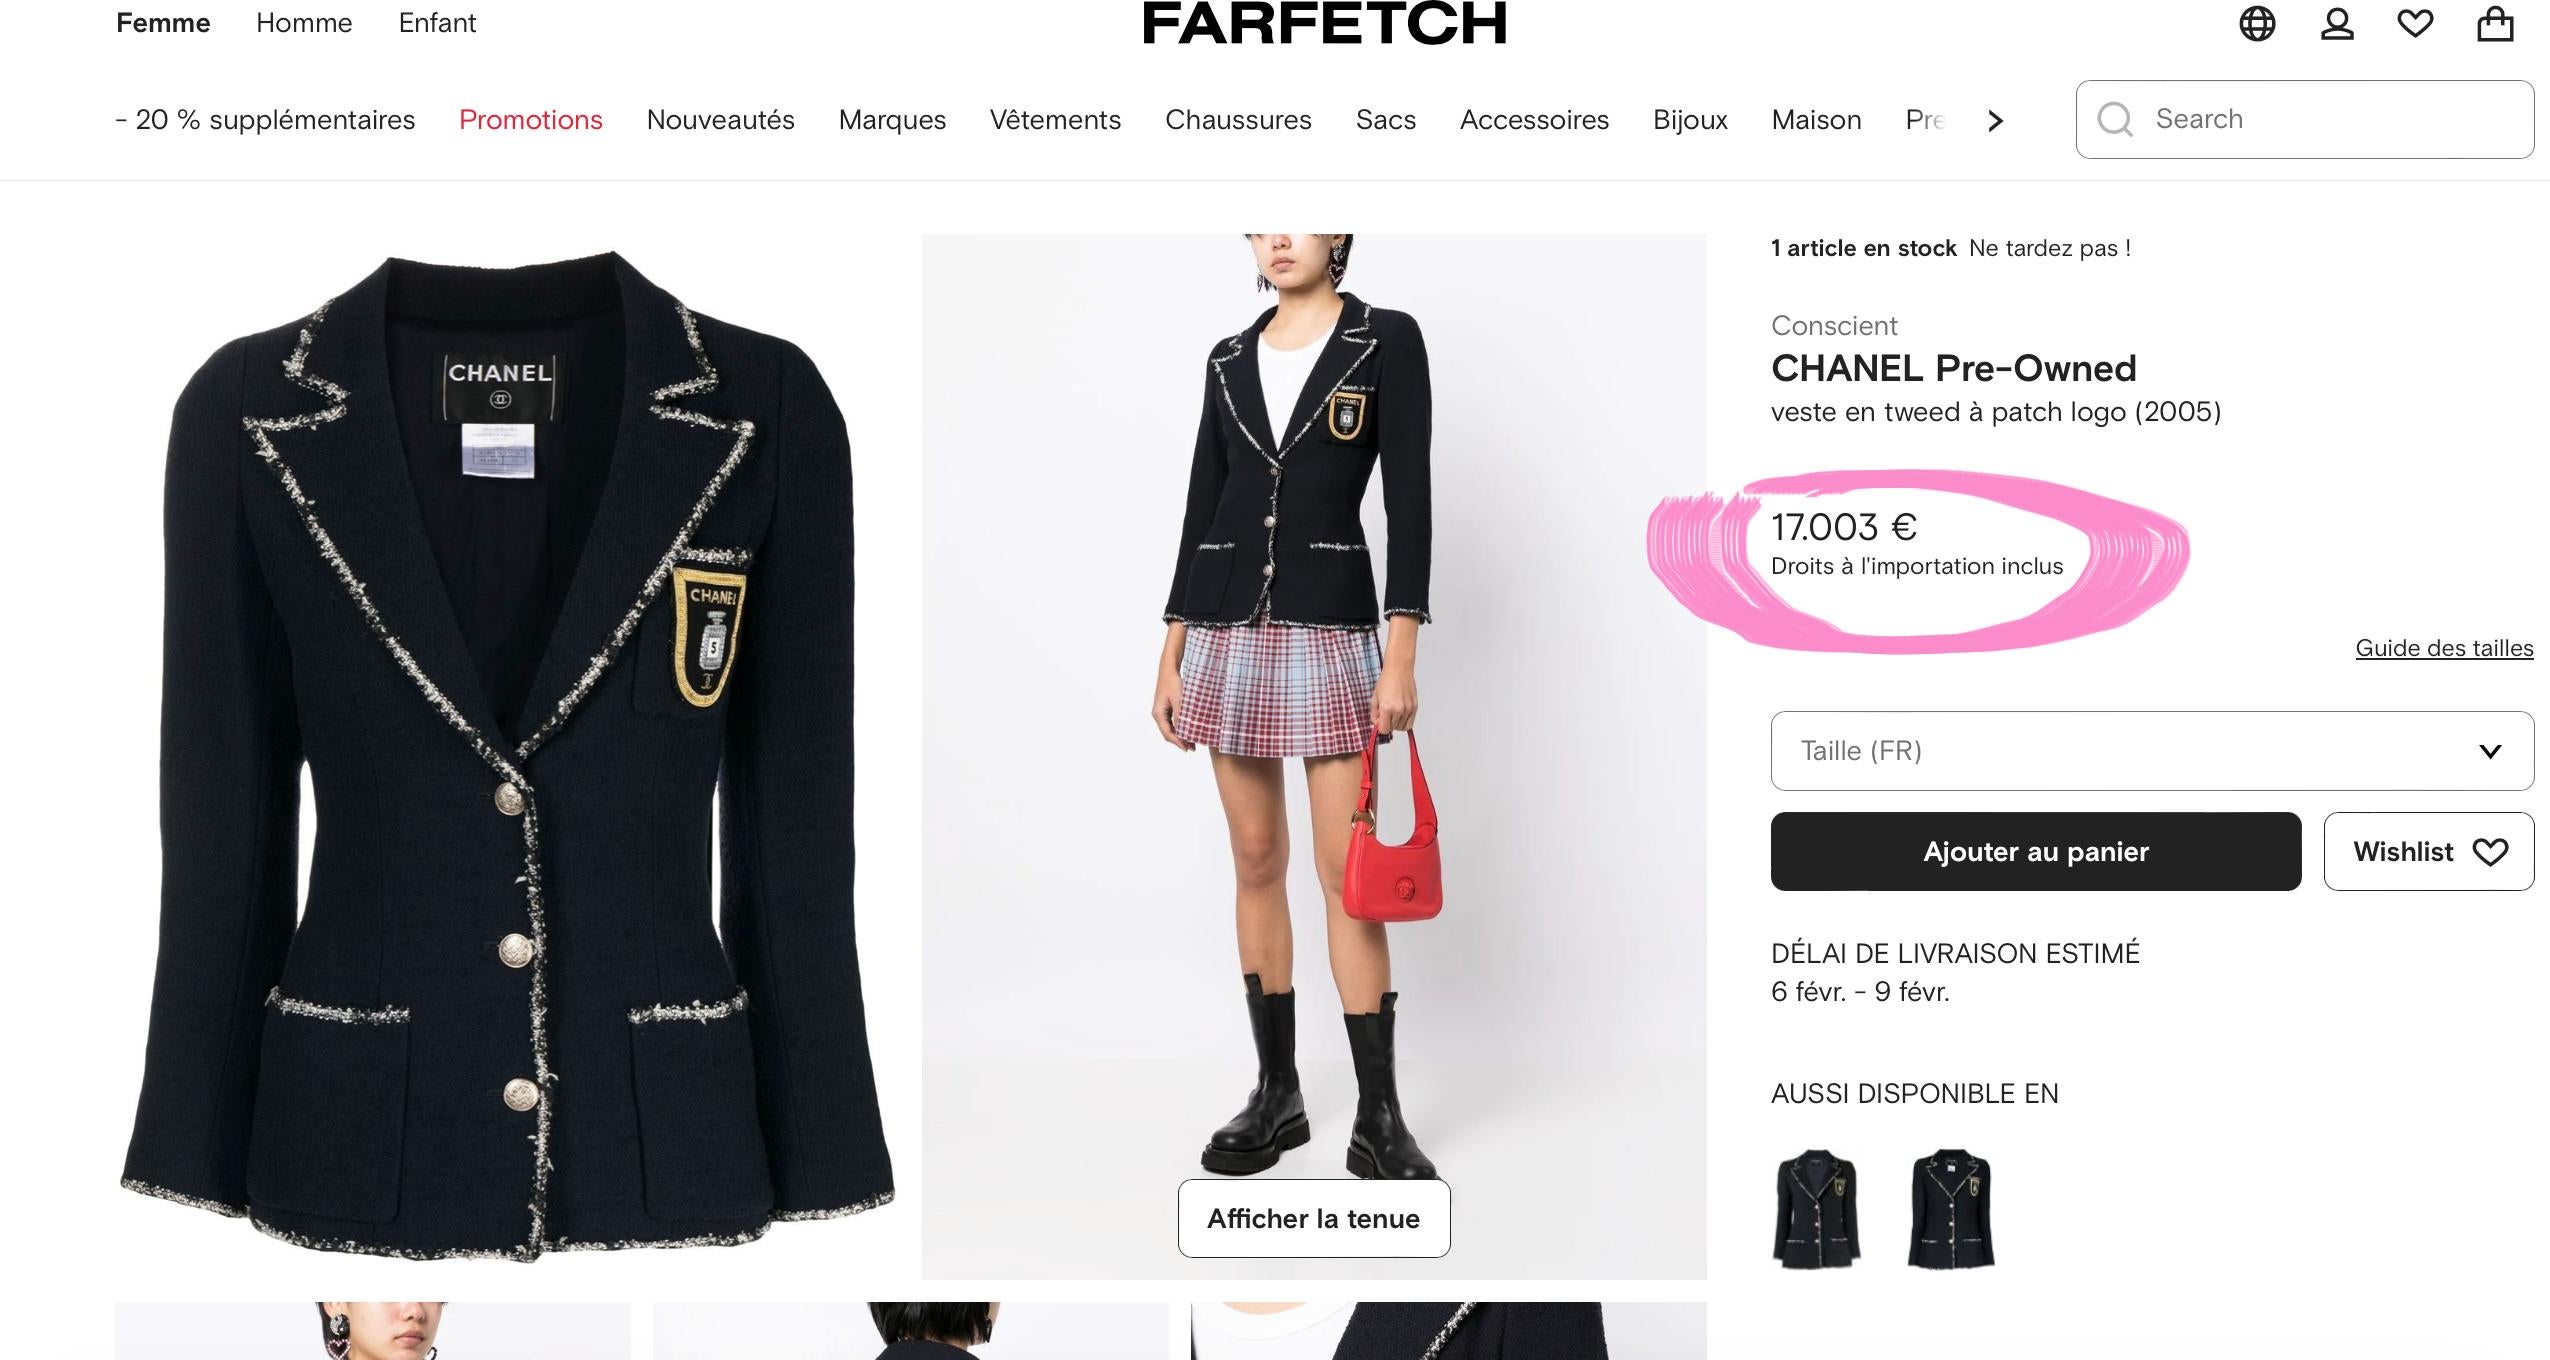 The most hunted after Chanel black tweed jacket with CC Logo Patch -- as seen in Devil Wears Prada movie!
- Price on farfetch over 17,000€ for a pre-owned item
- from 2005 Cruise Collection, 05C
- CC logo silver tone buttons at front and cuffs
-